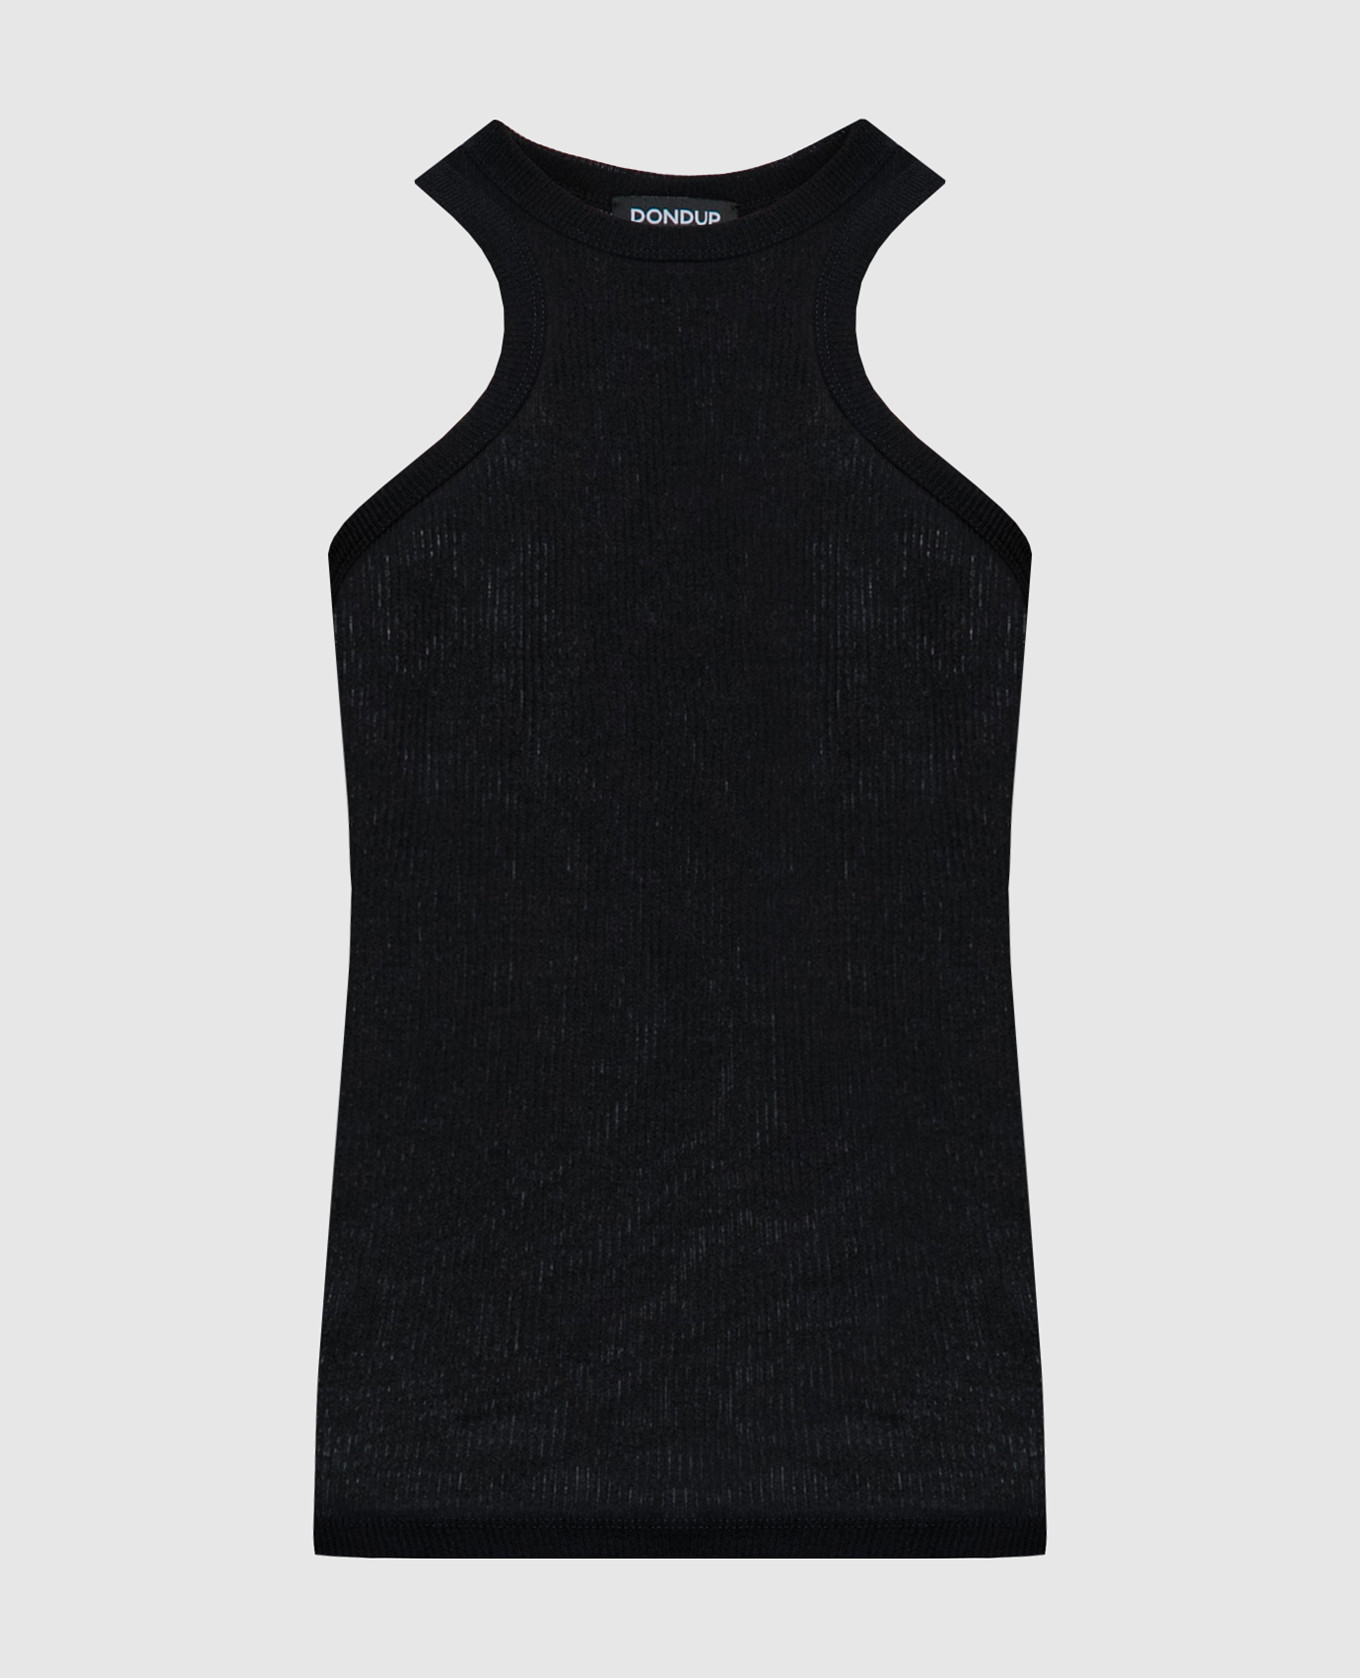 Black ribbed top with logo